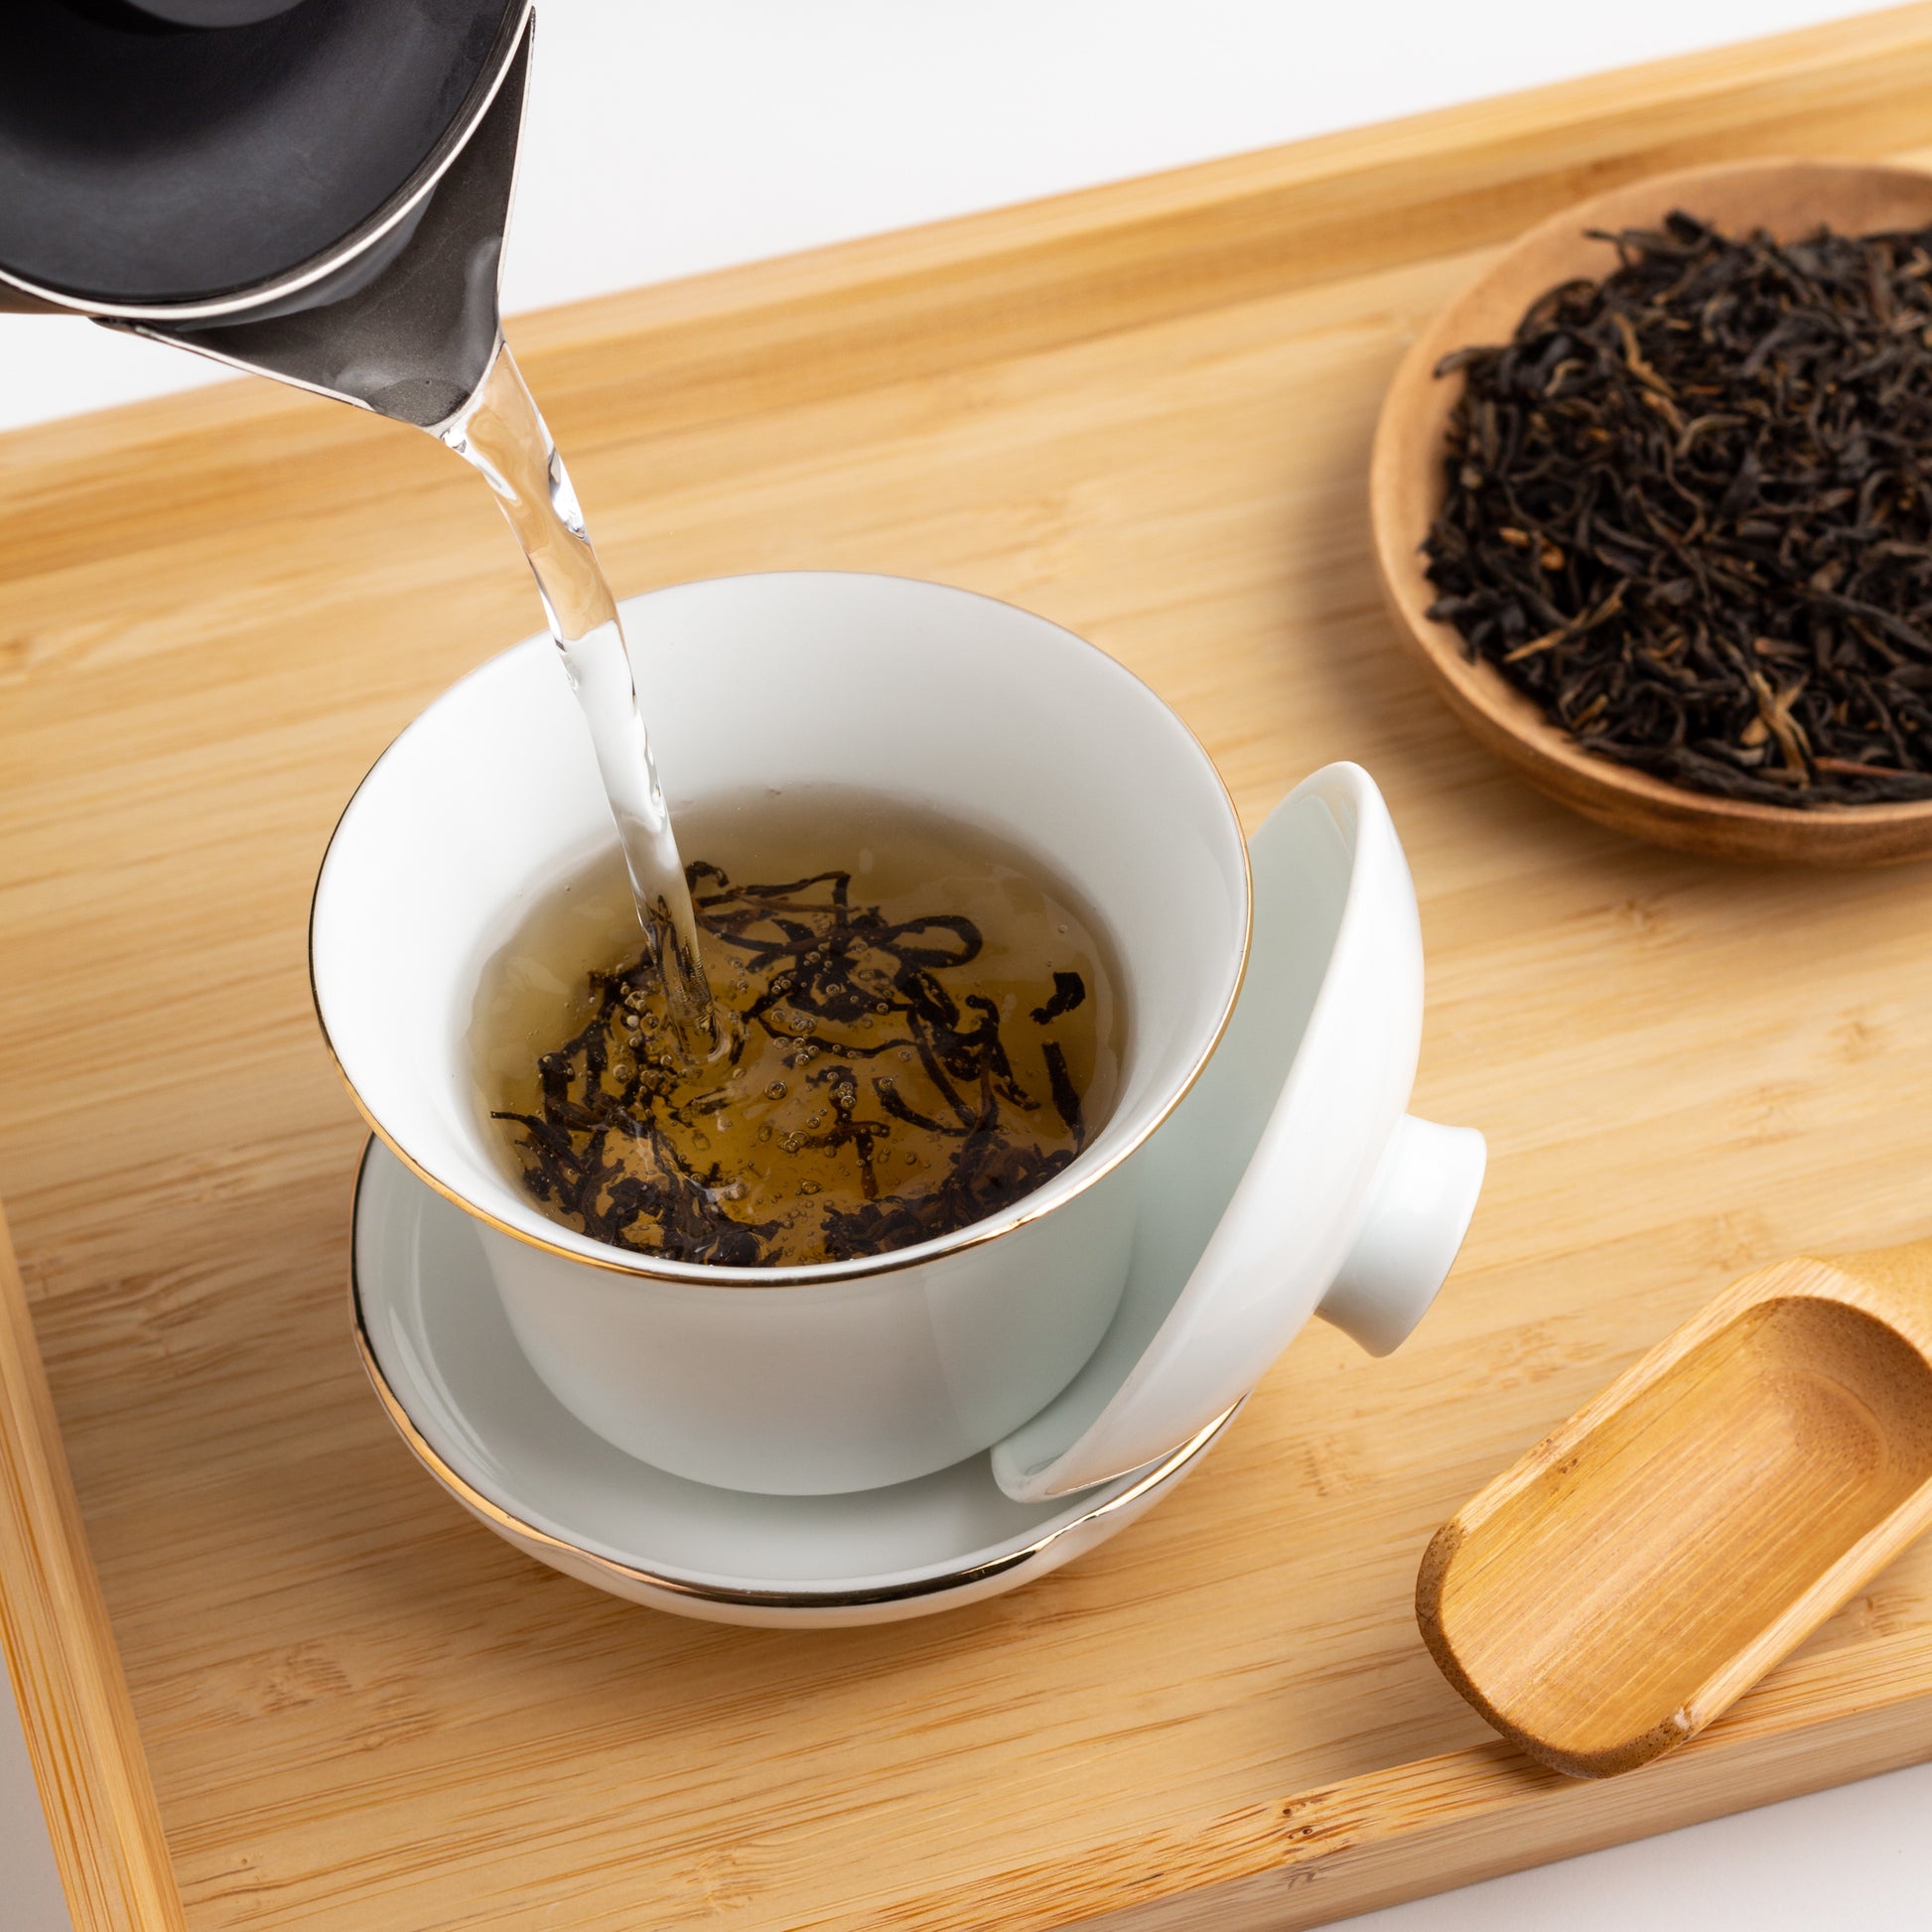 Golden Yunnan Organic Black Tea shown being brewed in a white gaiwan cup on a wooden tray. Water is being poured into the cup with tea leaves.